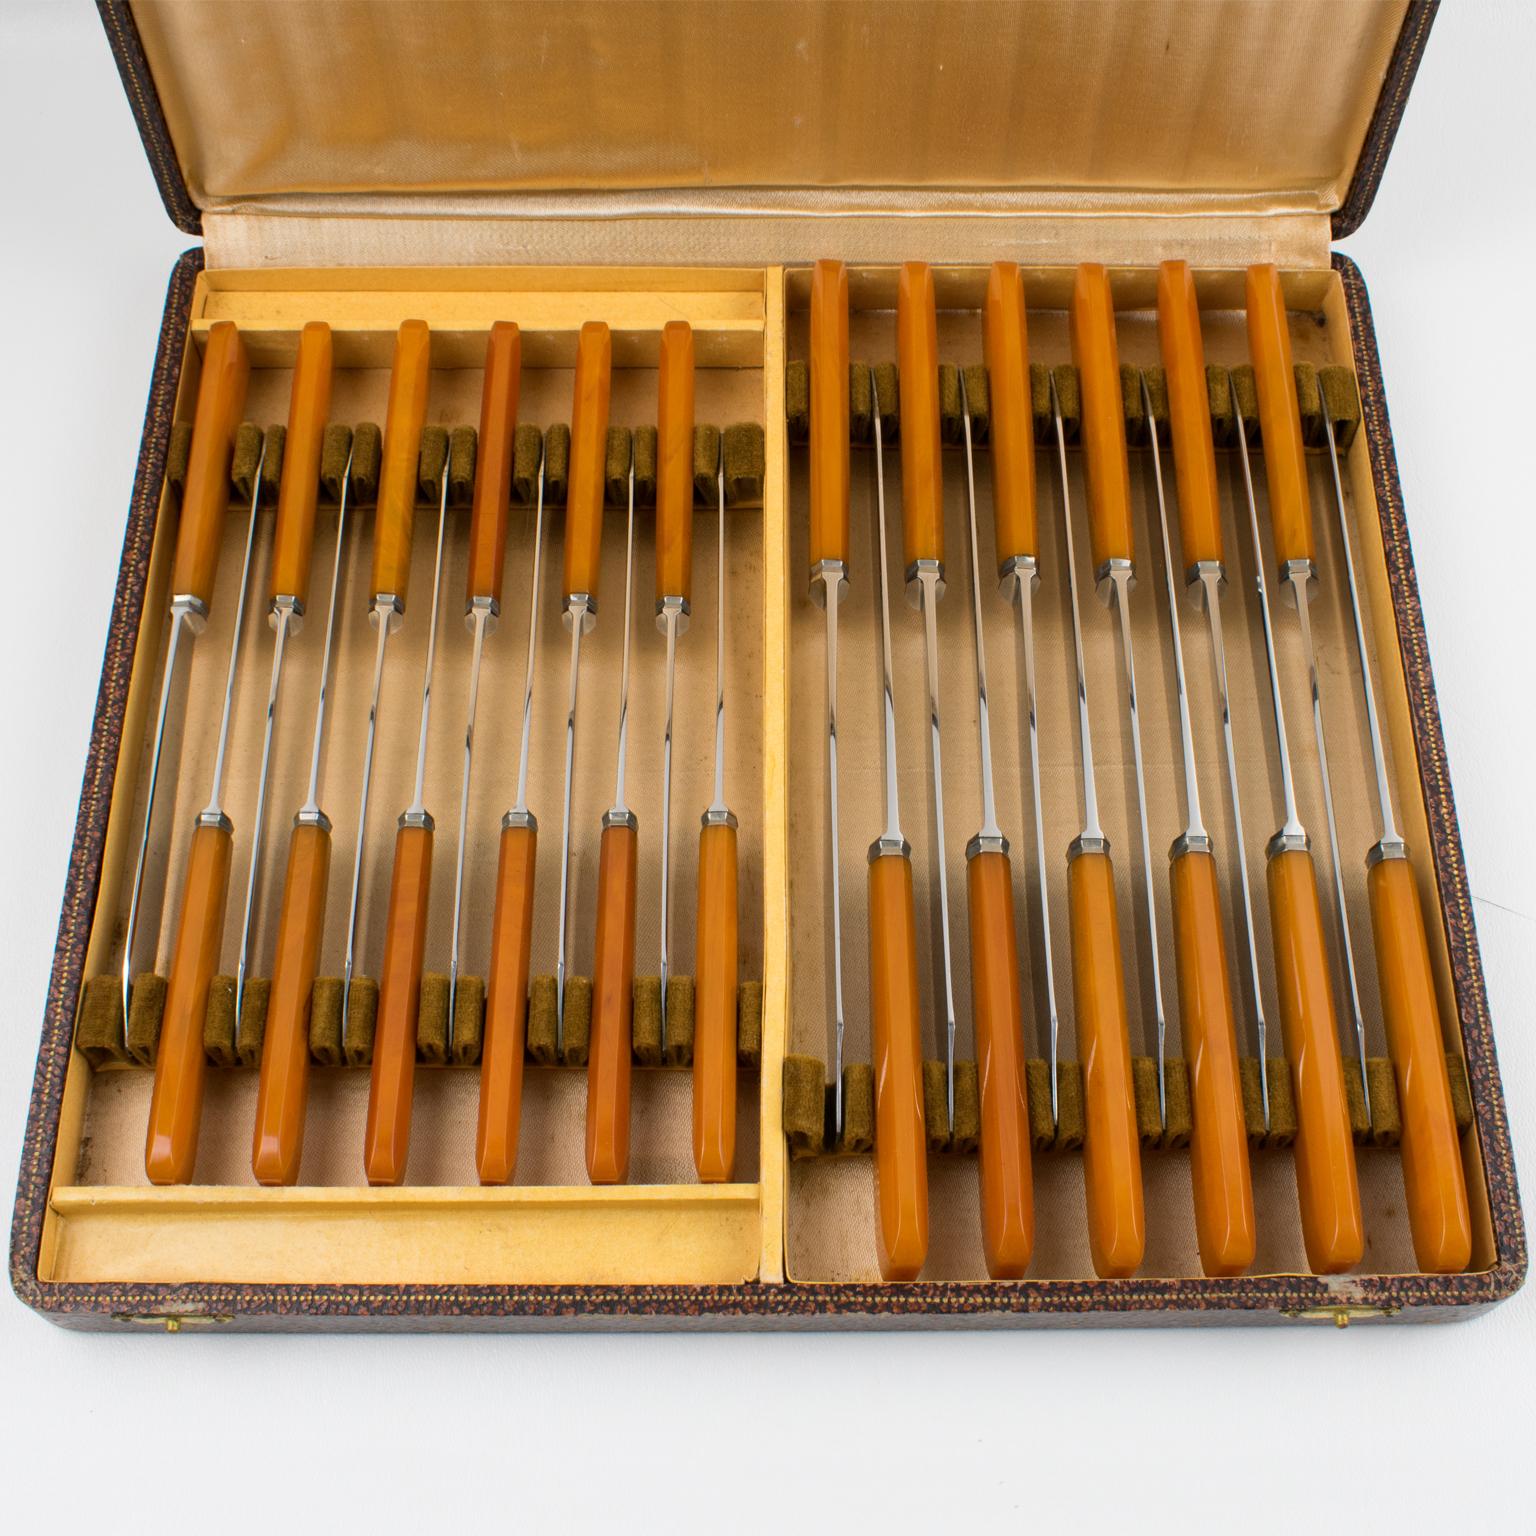 This elegant French Art Deco Bakelite and stainless steel knife set is still in its original box. The two ensembles consist of 12 pieces each, specifically designed for meat and fruit/cheese. The pieces feature stainless Steel blades (in French